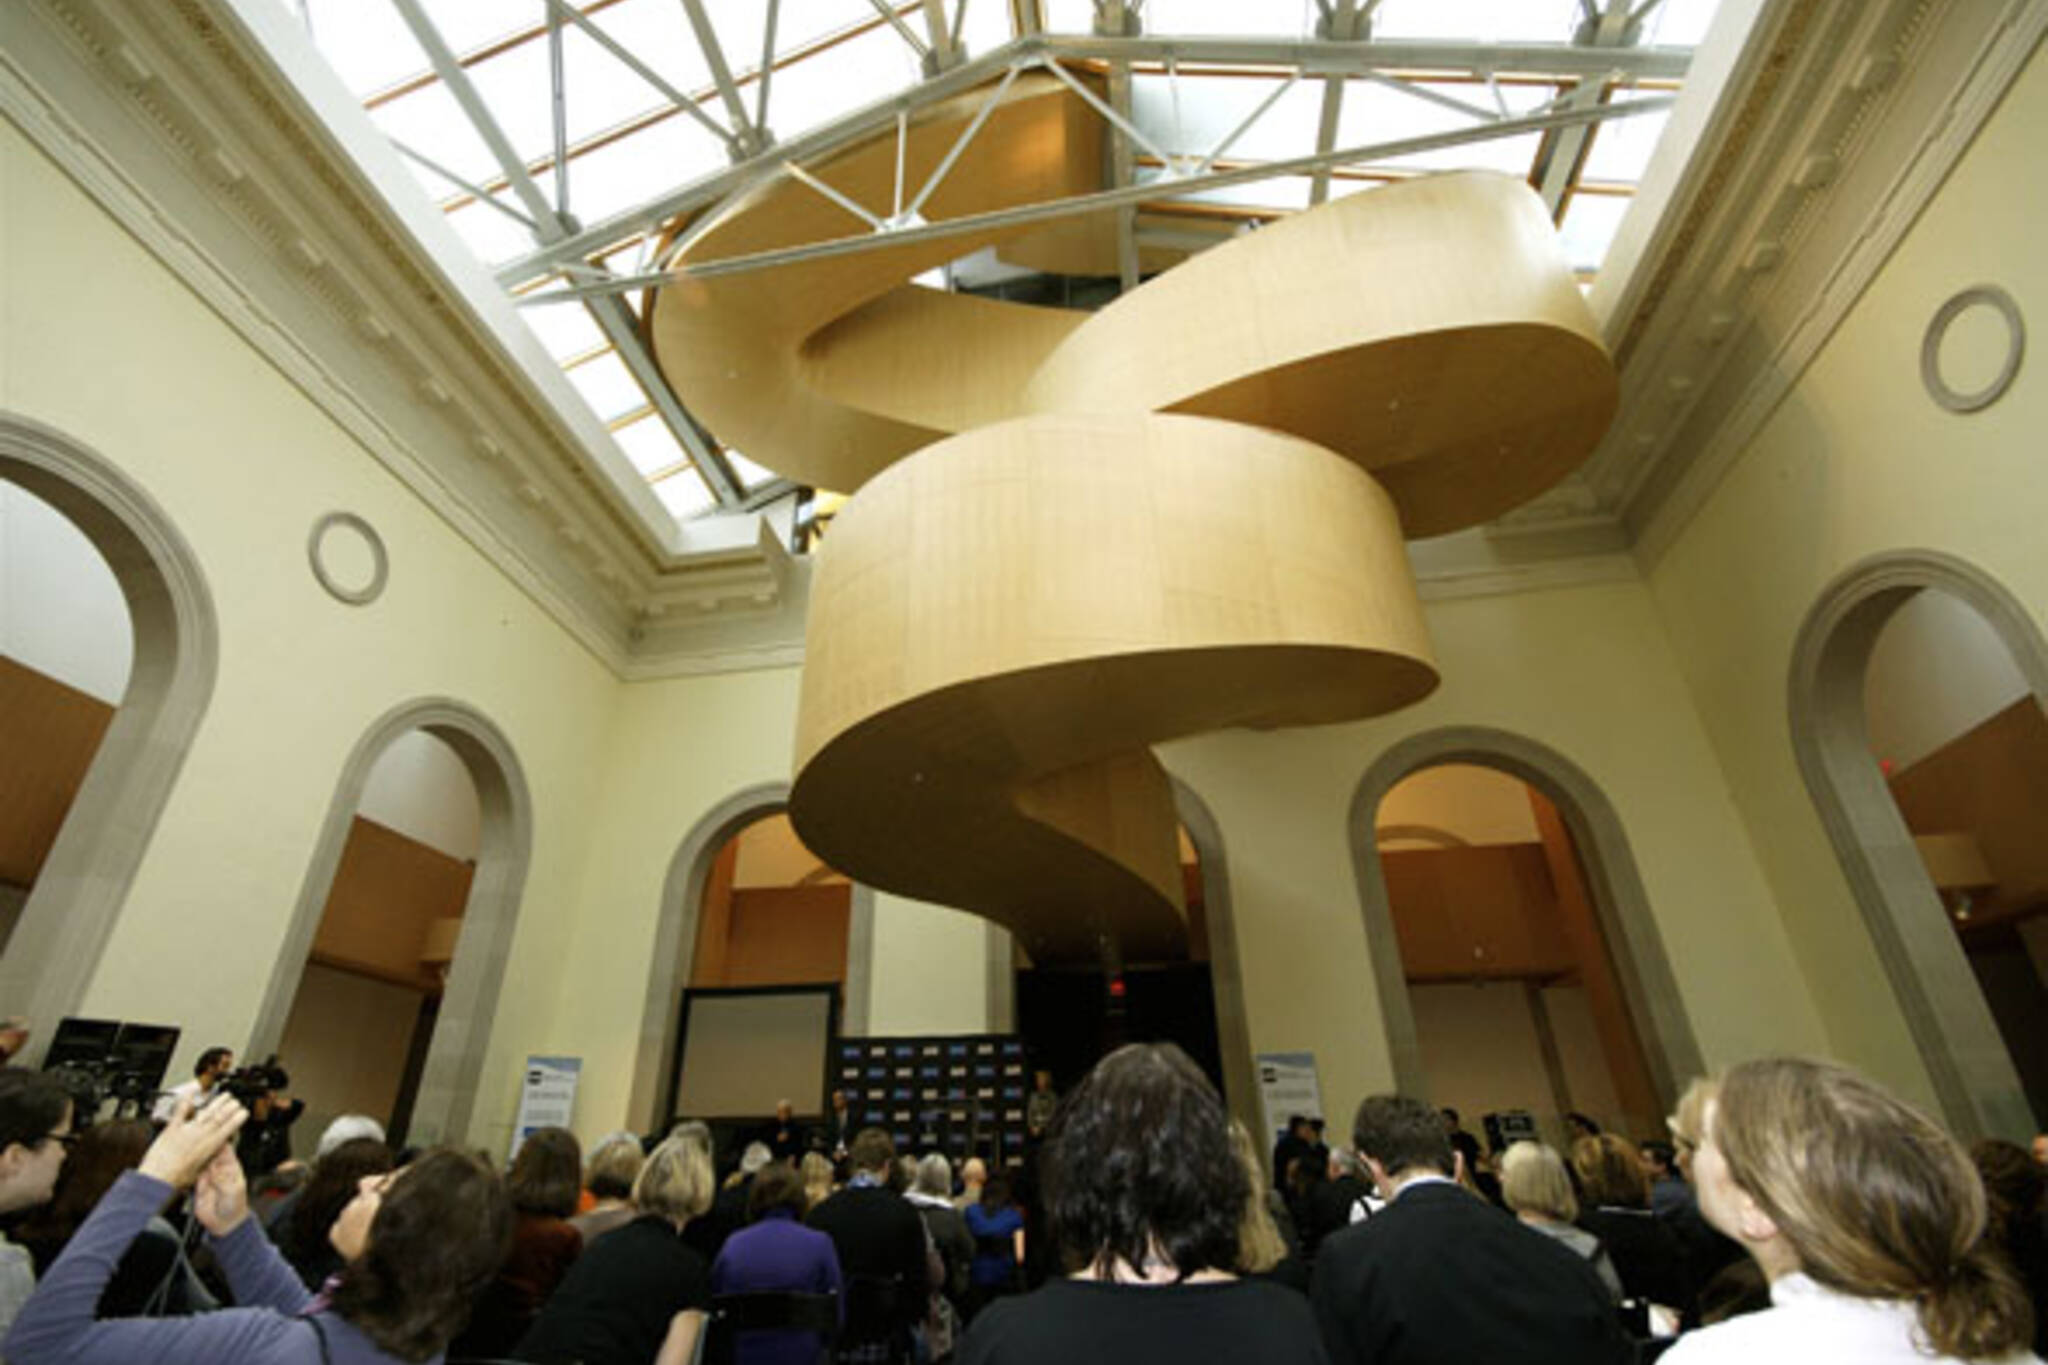 The New Art Gallery of Ontario (AGO) opens to a crowd with architect Frank Gehry